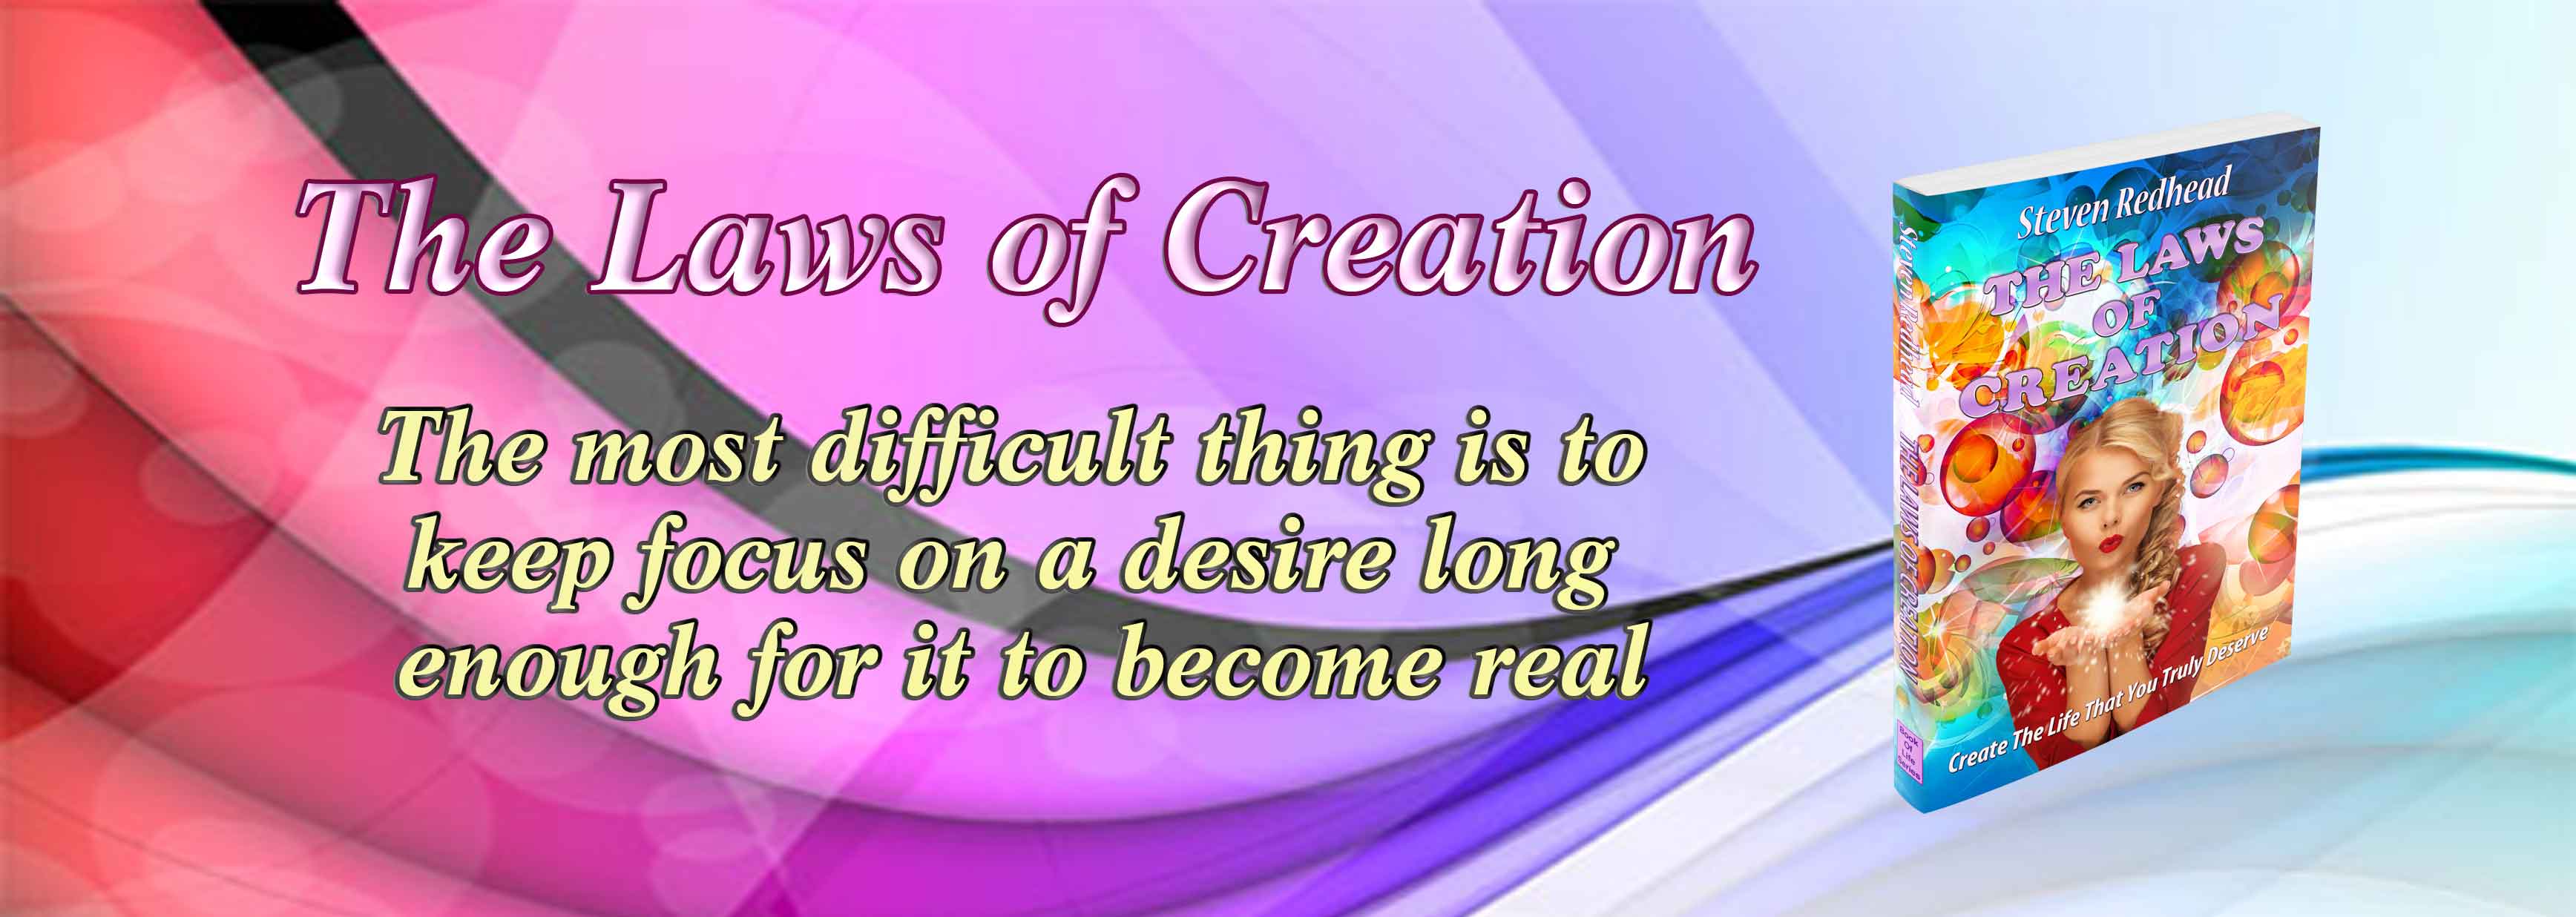 The Laws Of Creation Book 